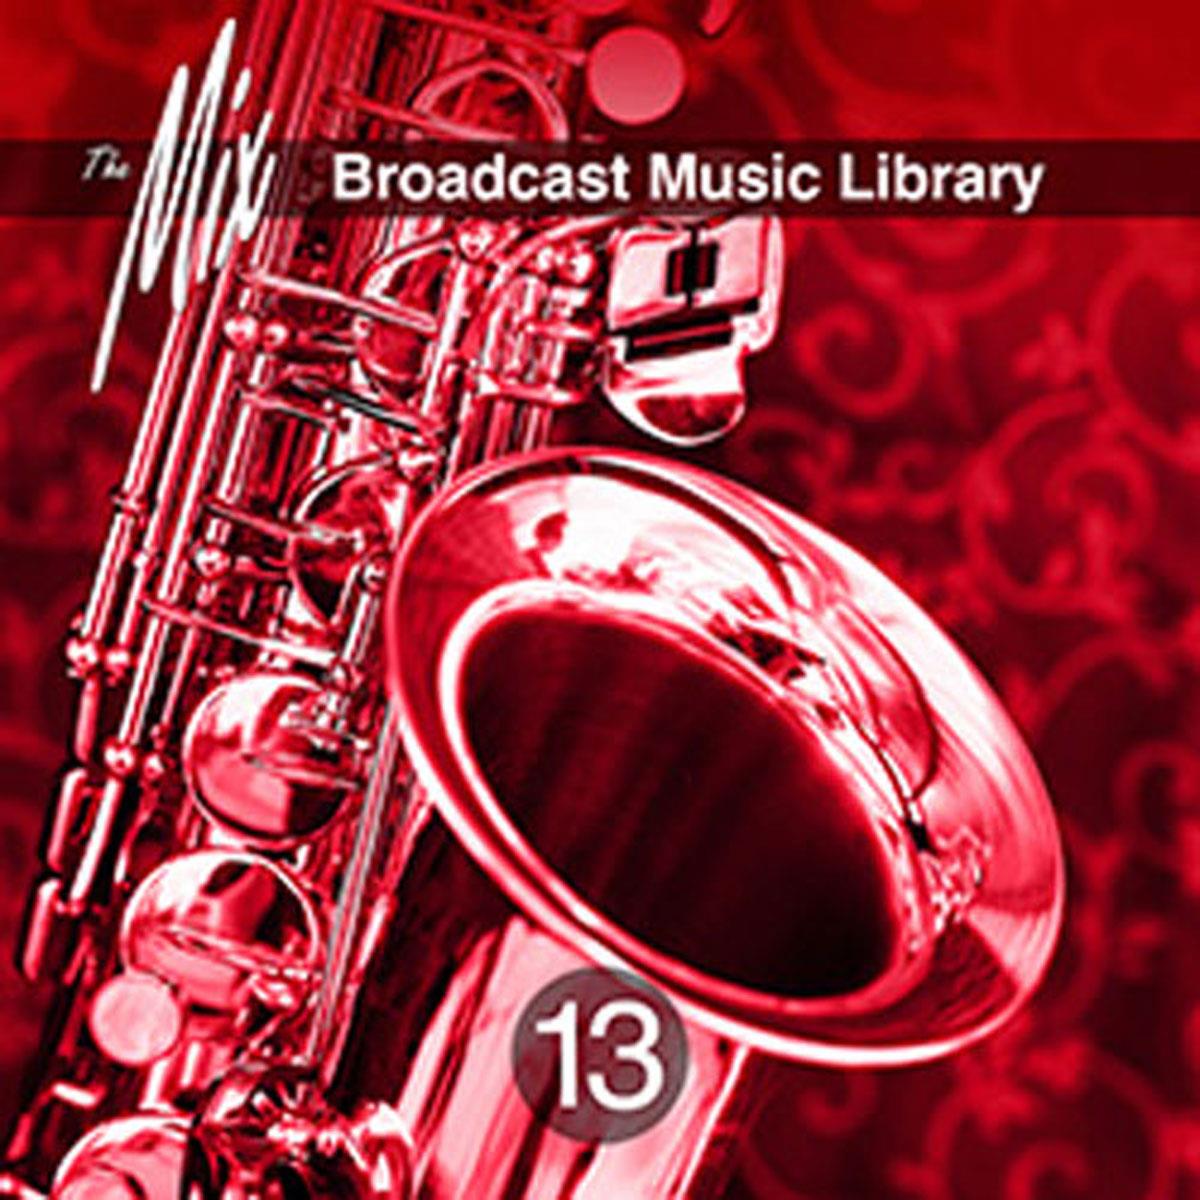 Image of Sound Ideas Mix XIII Broadcast Music Library on Audio CDs and DVDs